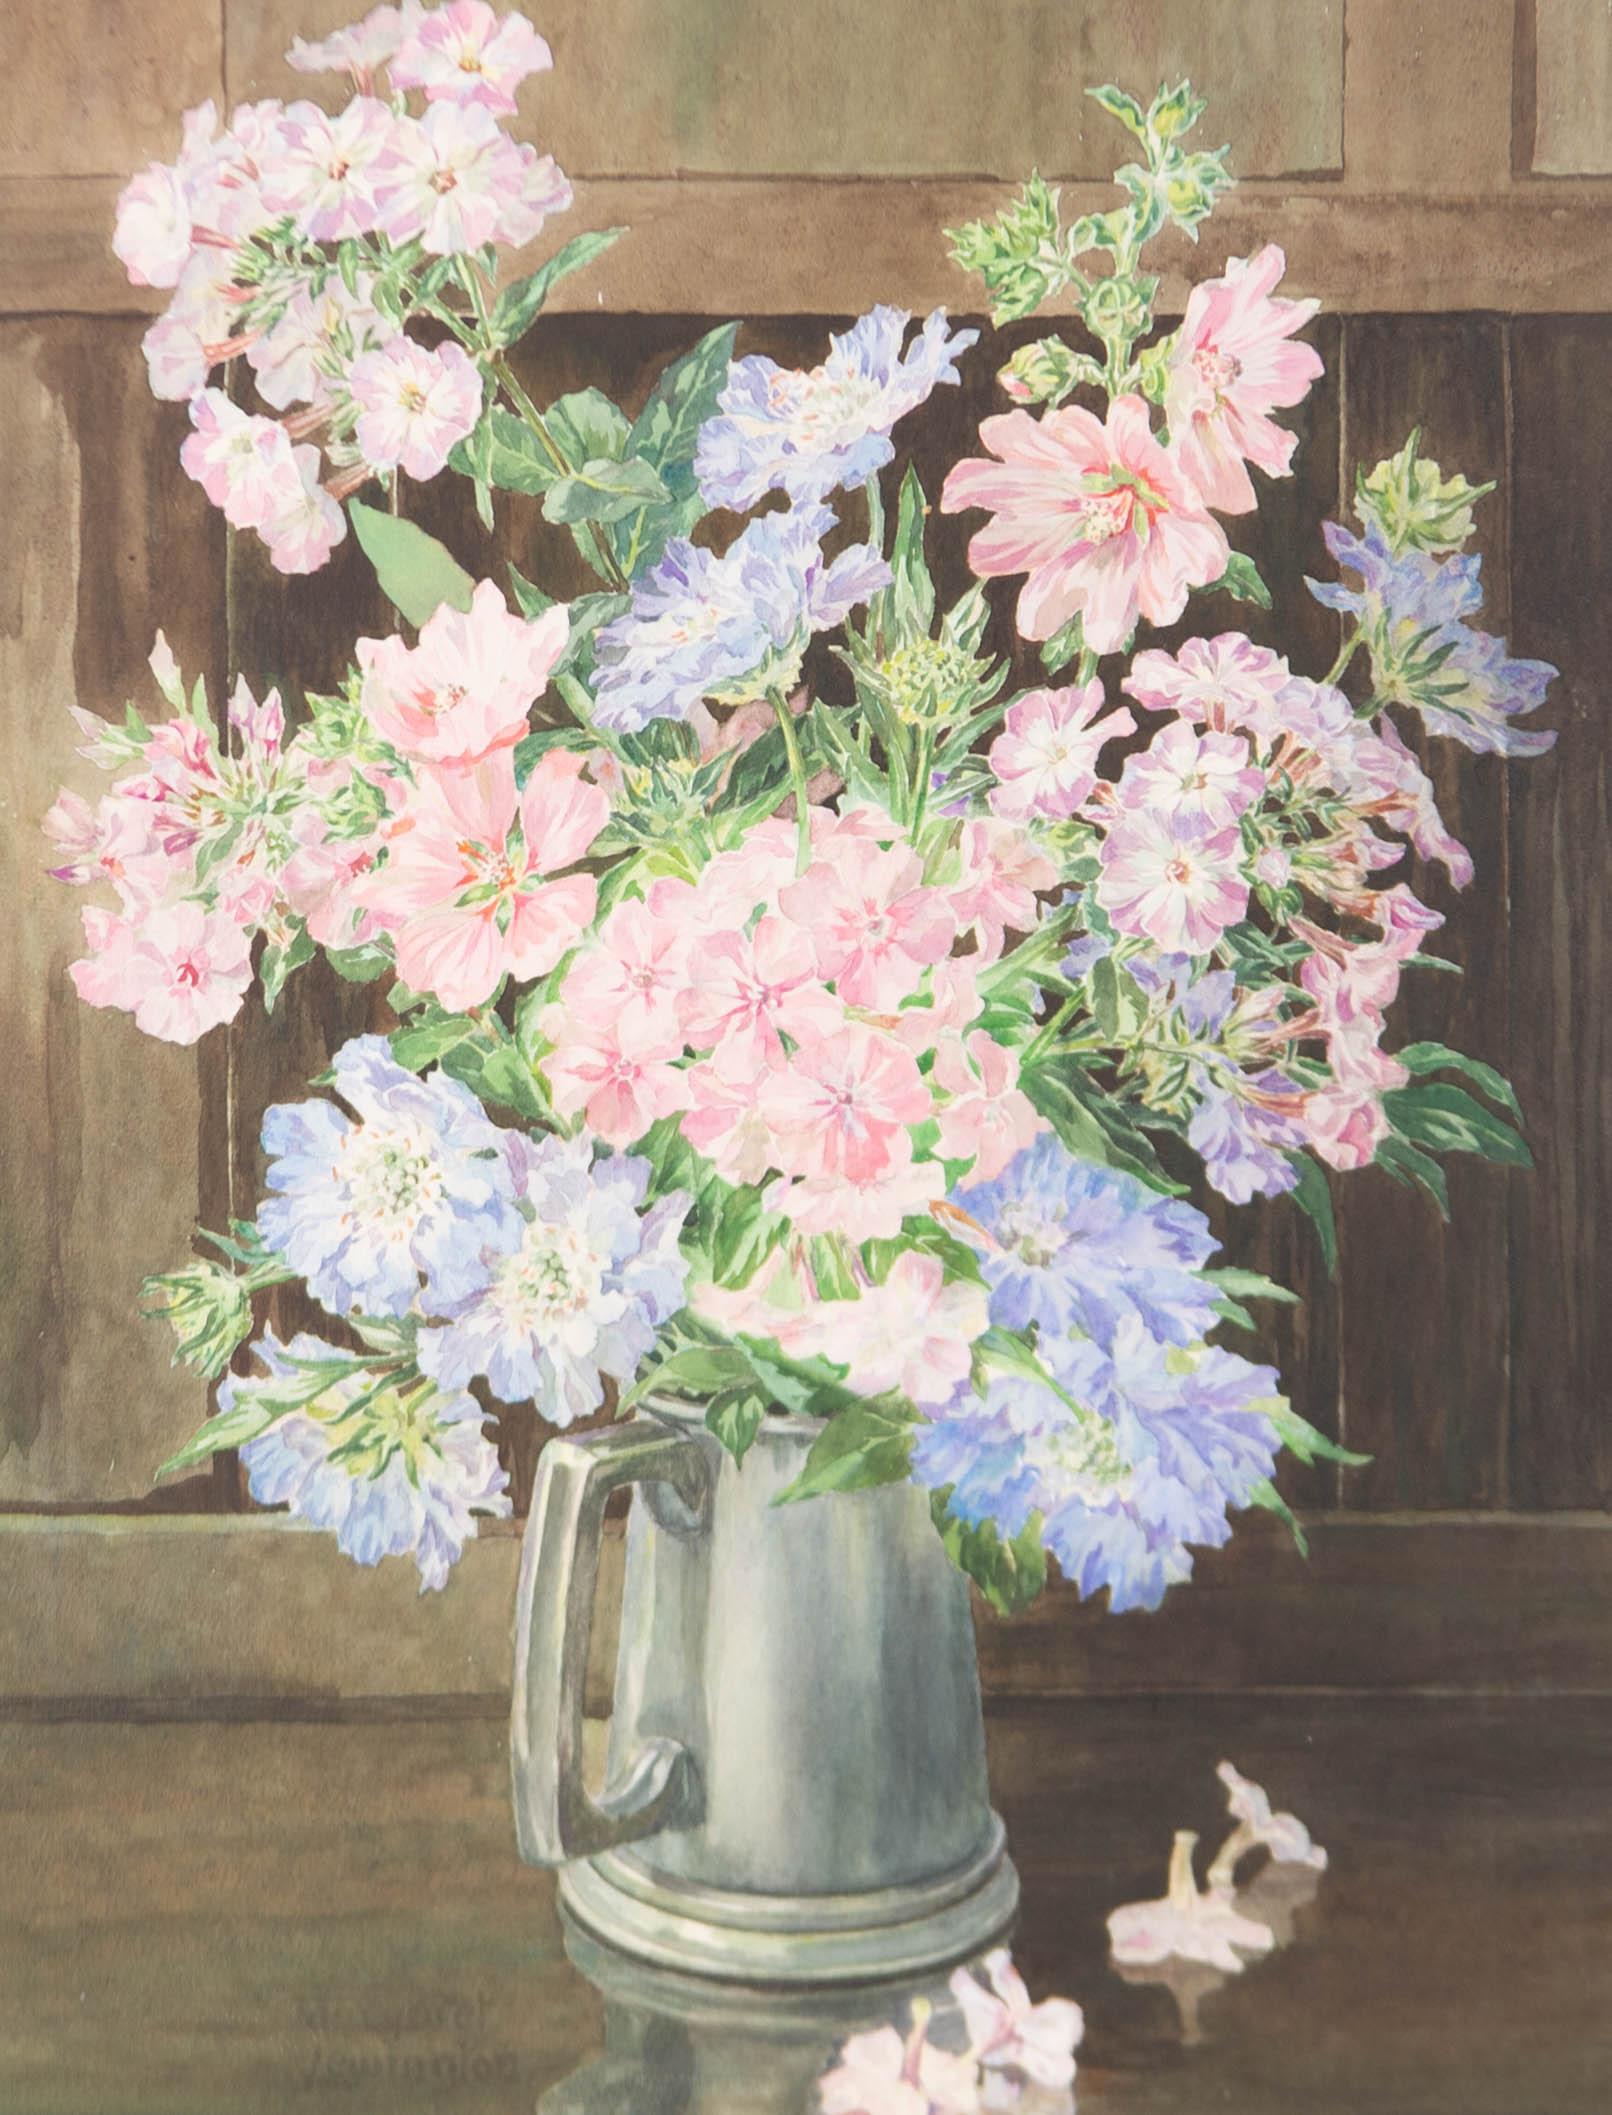 A beautiful watercolour depicting an arrangement of wildflowers in a metal tankard.

A metal tankard holds a variety of baby blue and pastel pink wildflowers to beautiful effect. The artwork is finished to an extraordinary level of detail and is